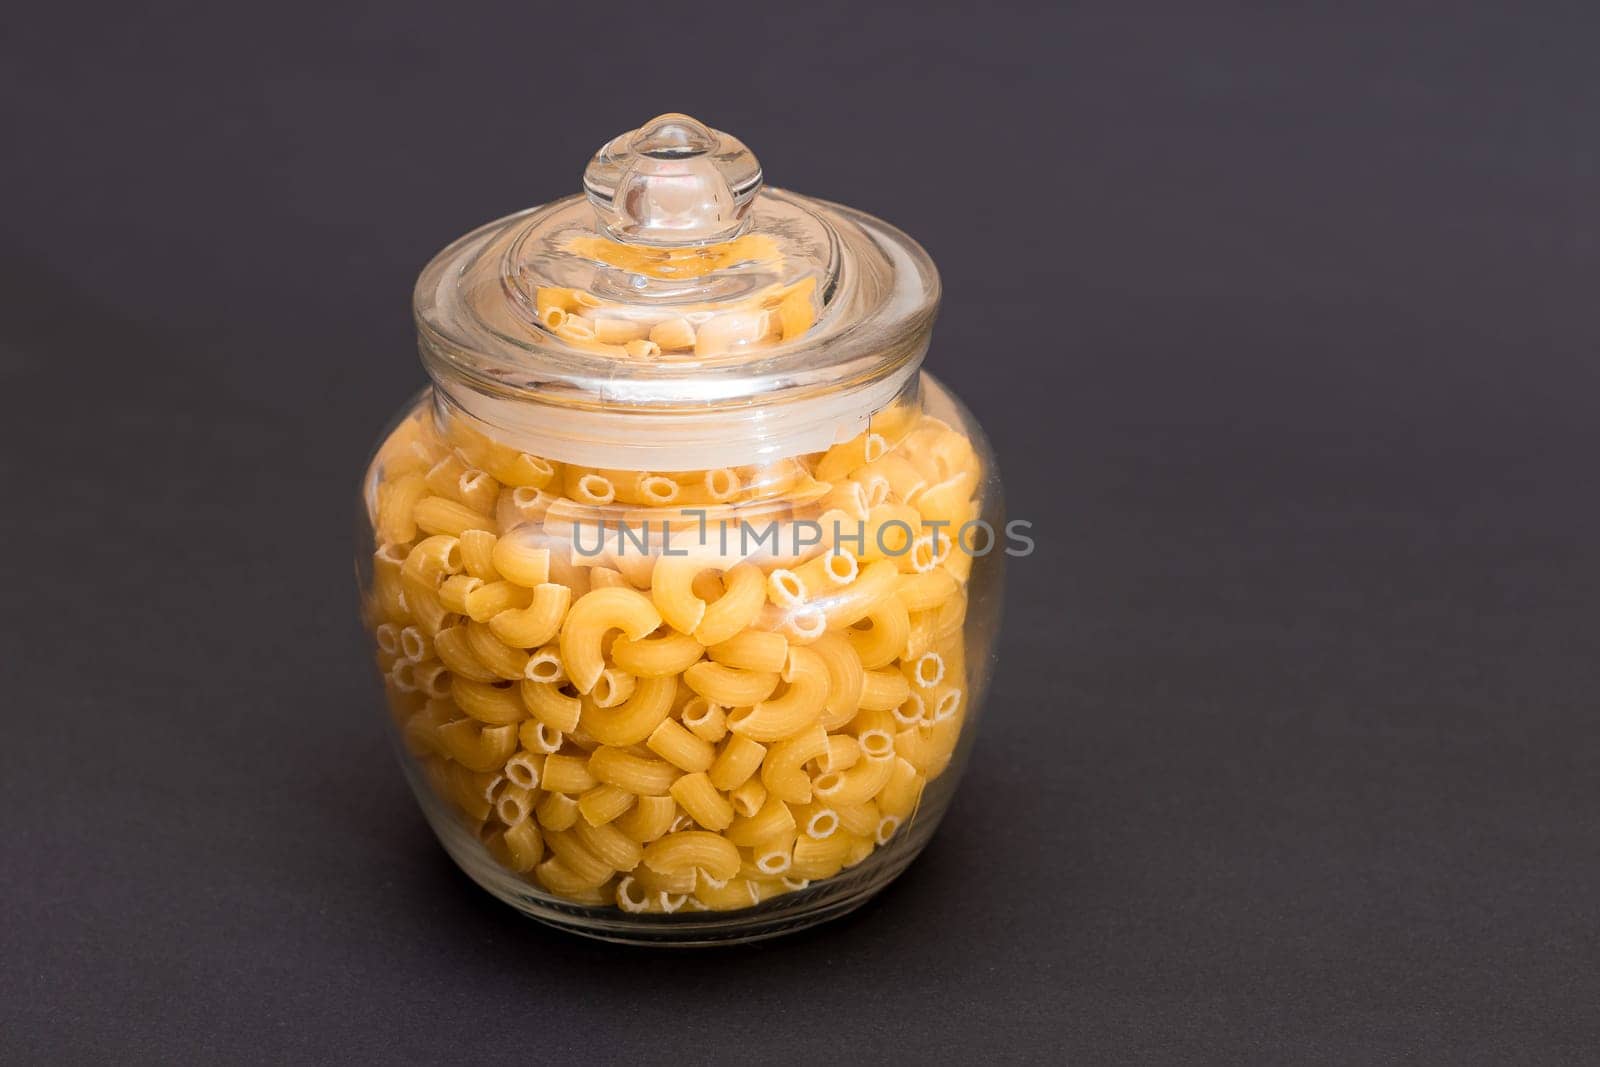 Uncooked Chifferi Rigati Pasta in Glass Jar on Black Background by InfinitumProdux